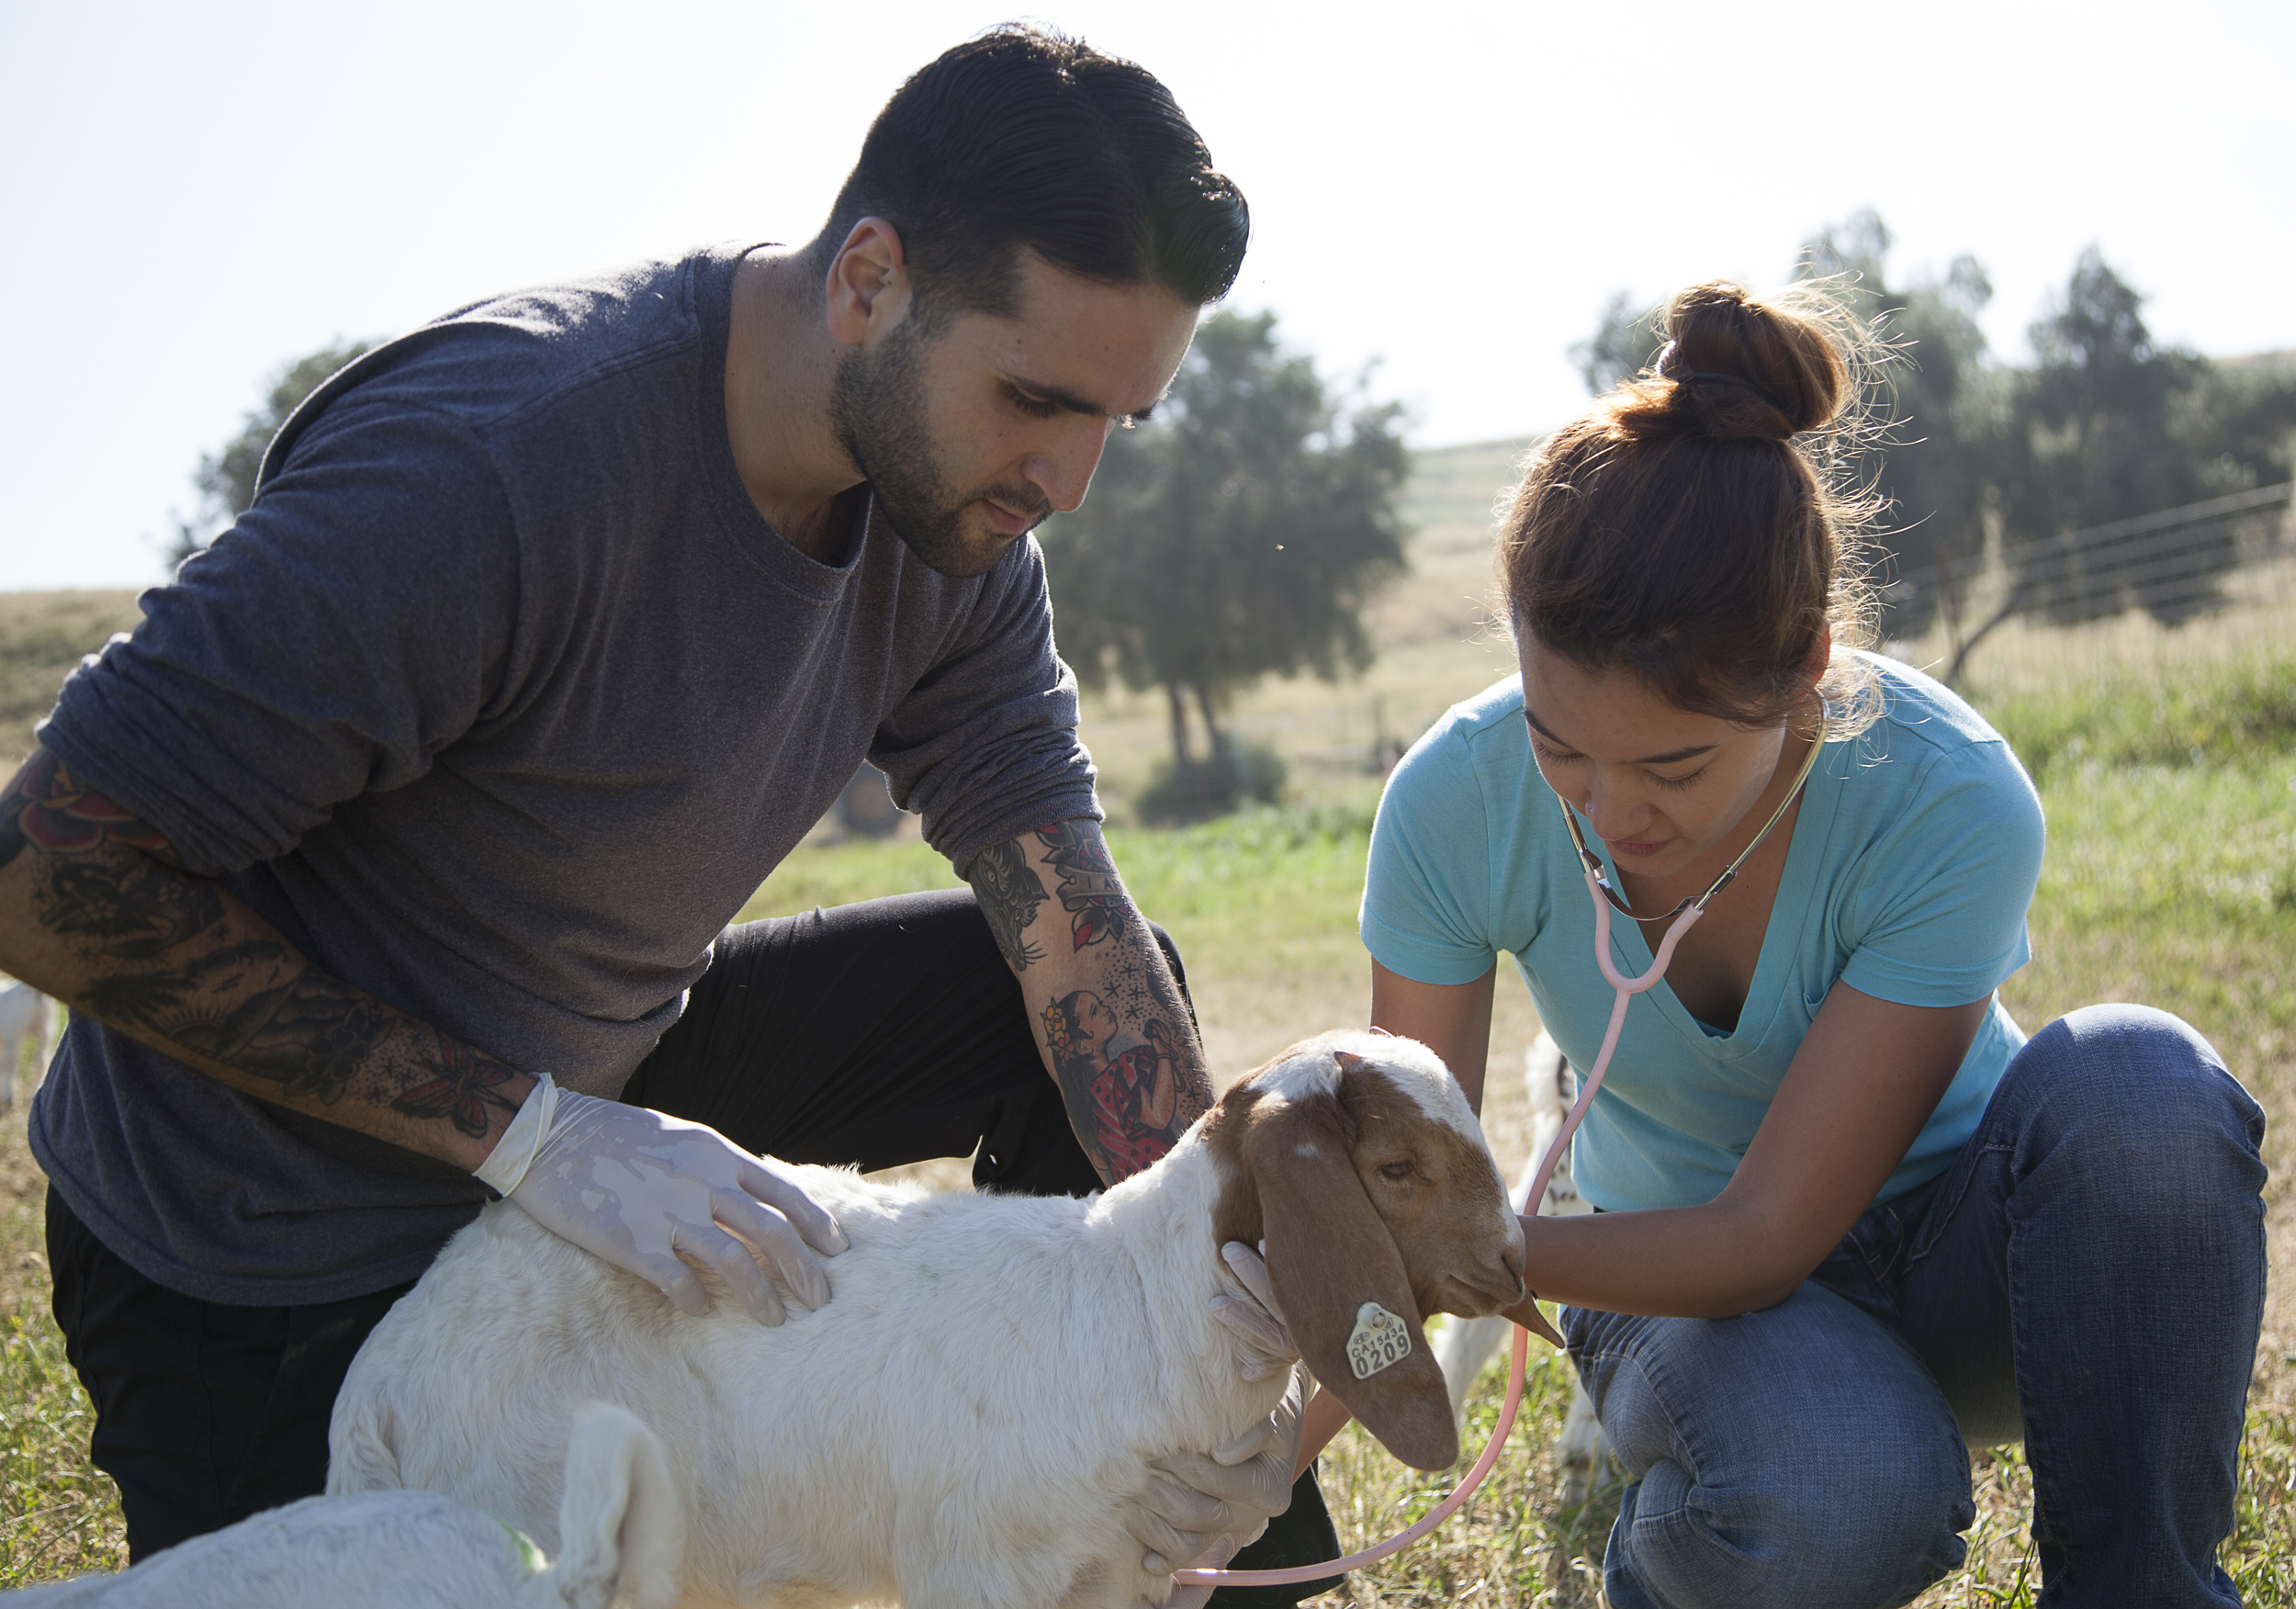  Ben Singh keeps a baby goat steady while Yuri Foreman checks its heartbeat during a physical exam at the Pierce farm on Friday, March 20, 2015. Woodland Hills, Calif.  Read the full story&nbsp; here  